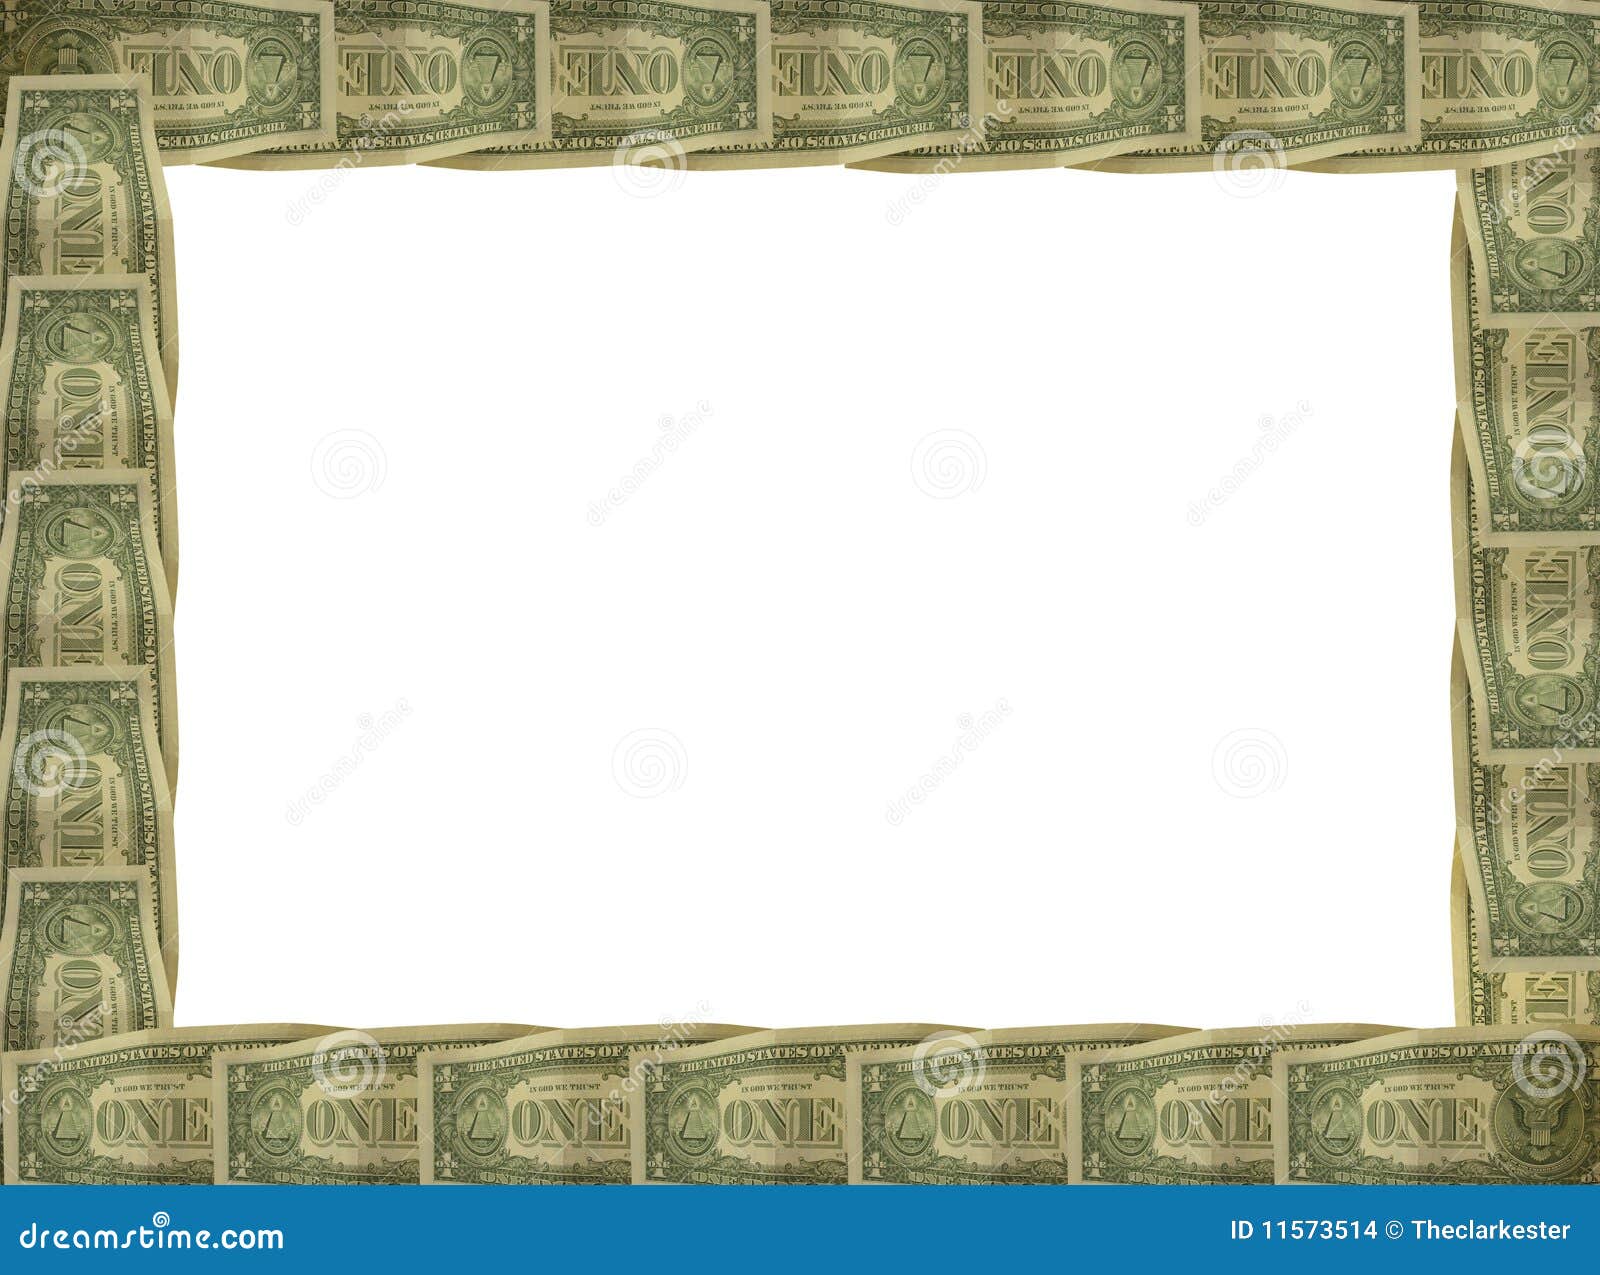 Dollar Bill Border With White Background Stock Images - Image: 11573514